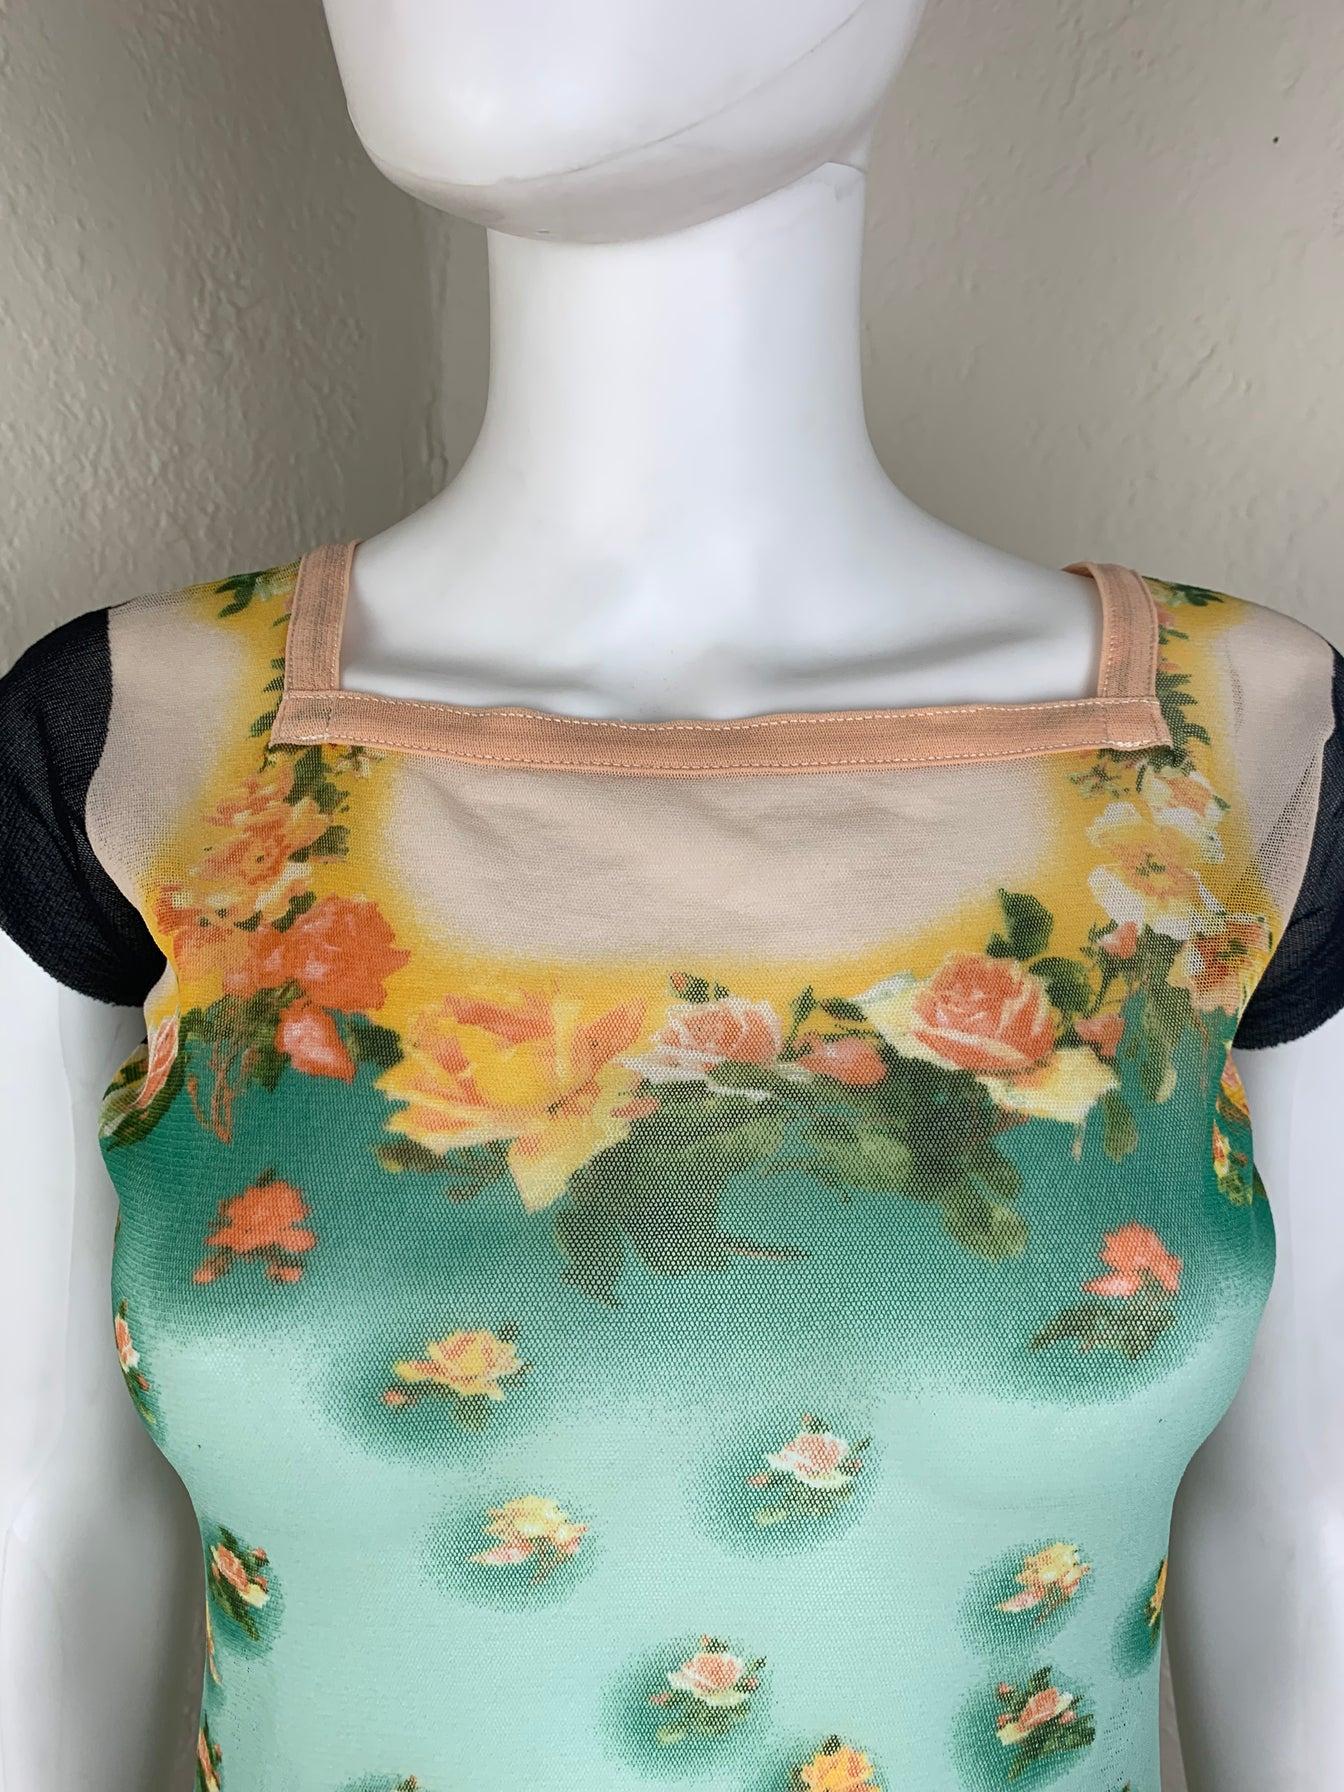 Jean-Paul Gaultier SS 2001 Top In Excellent Condition In Avon, CT